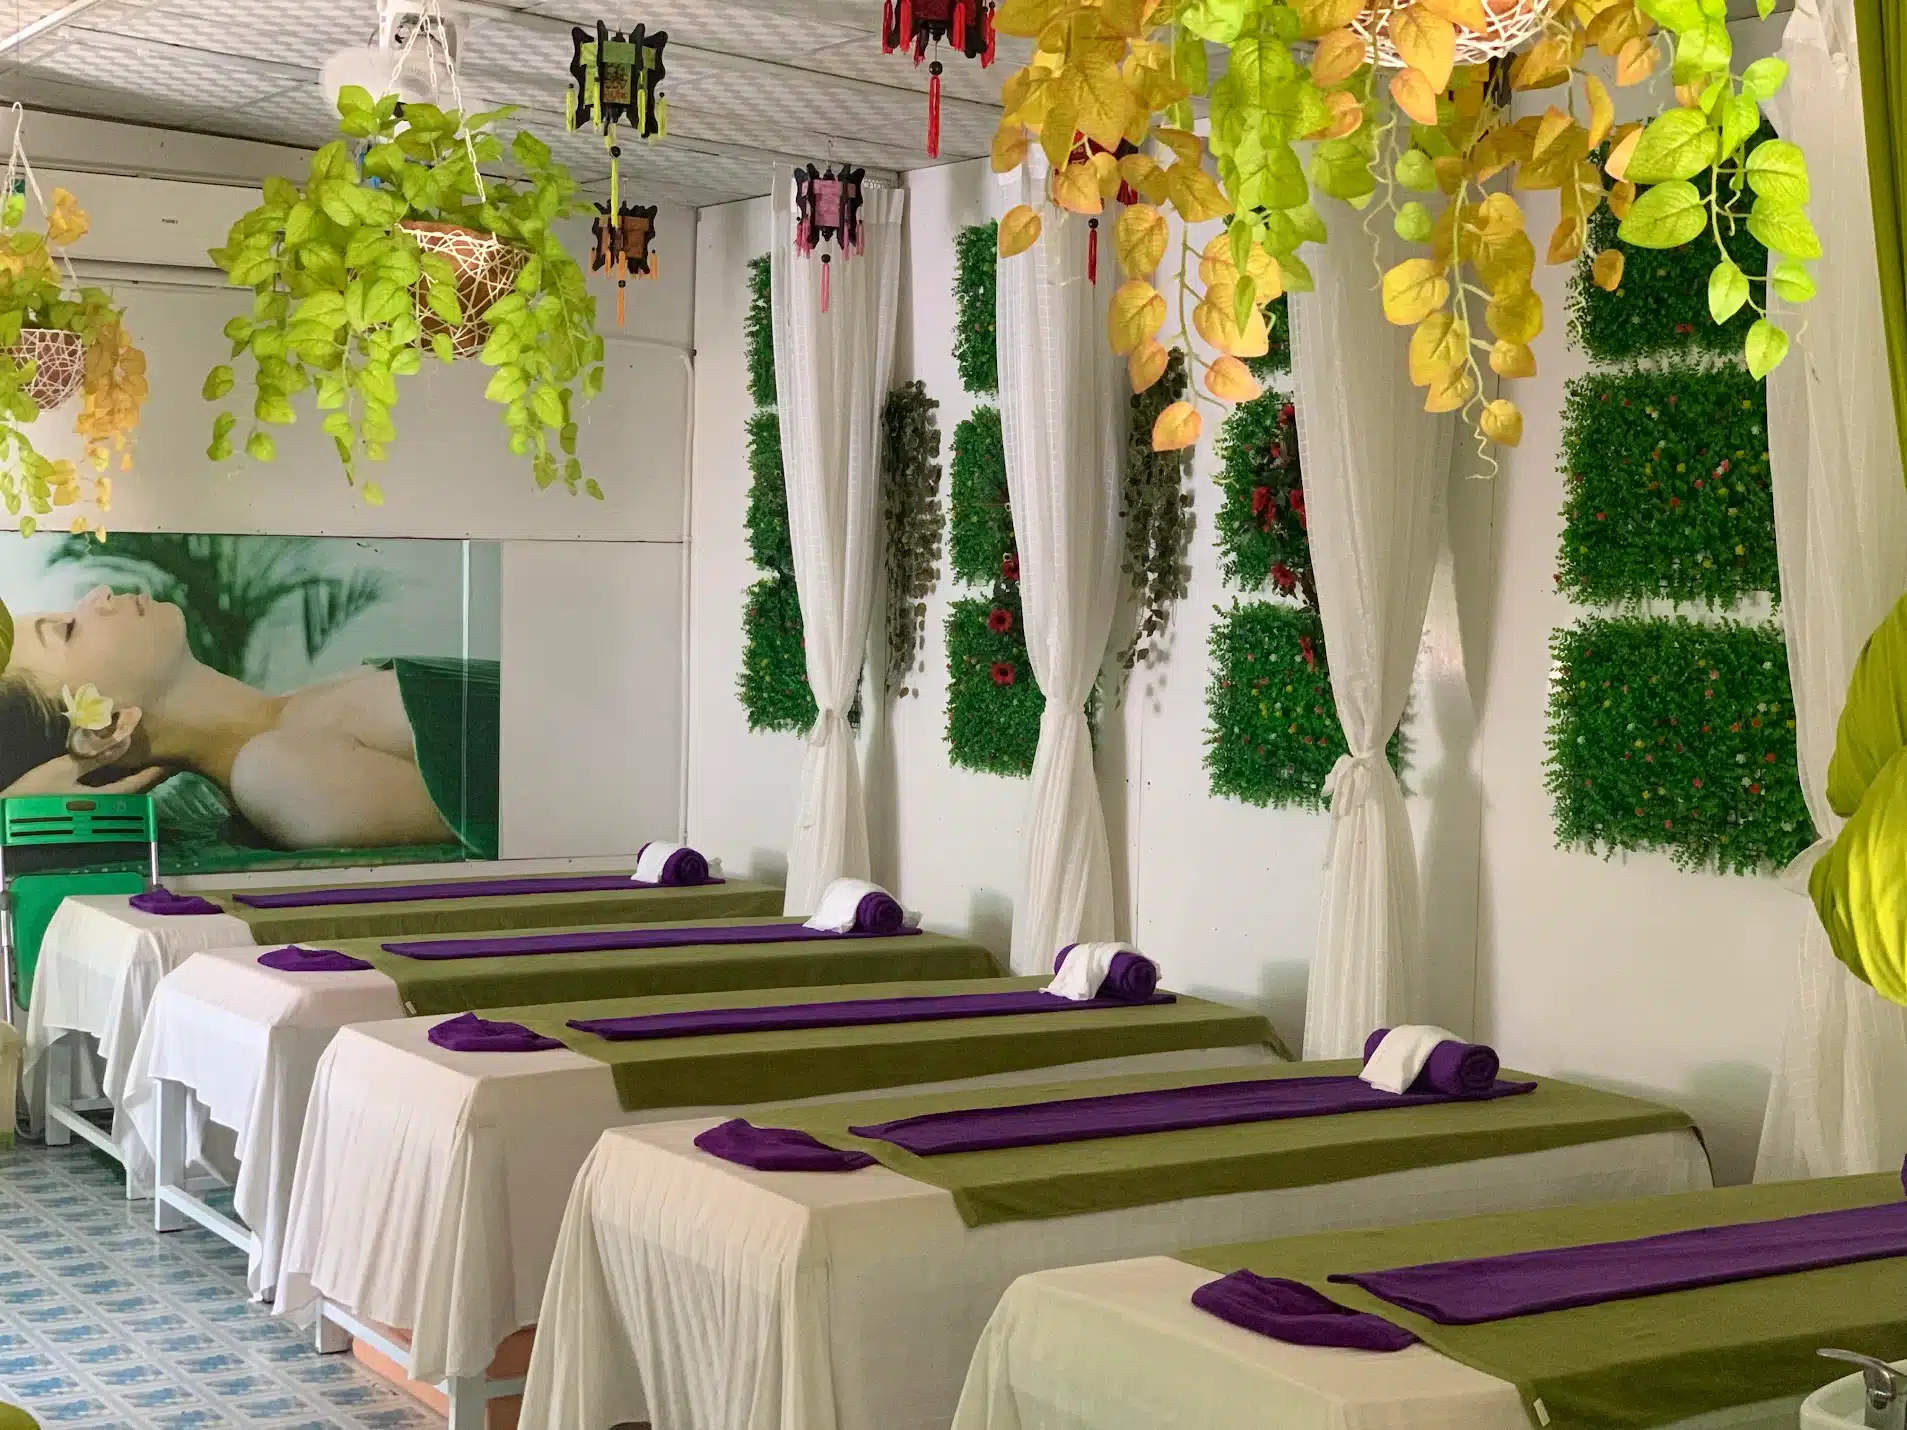 Phu Quoc day spa